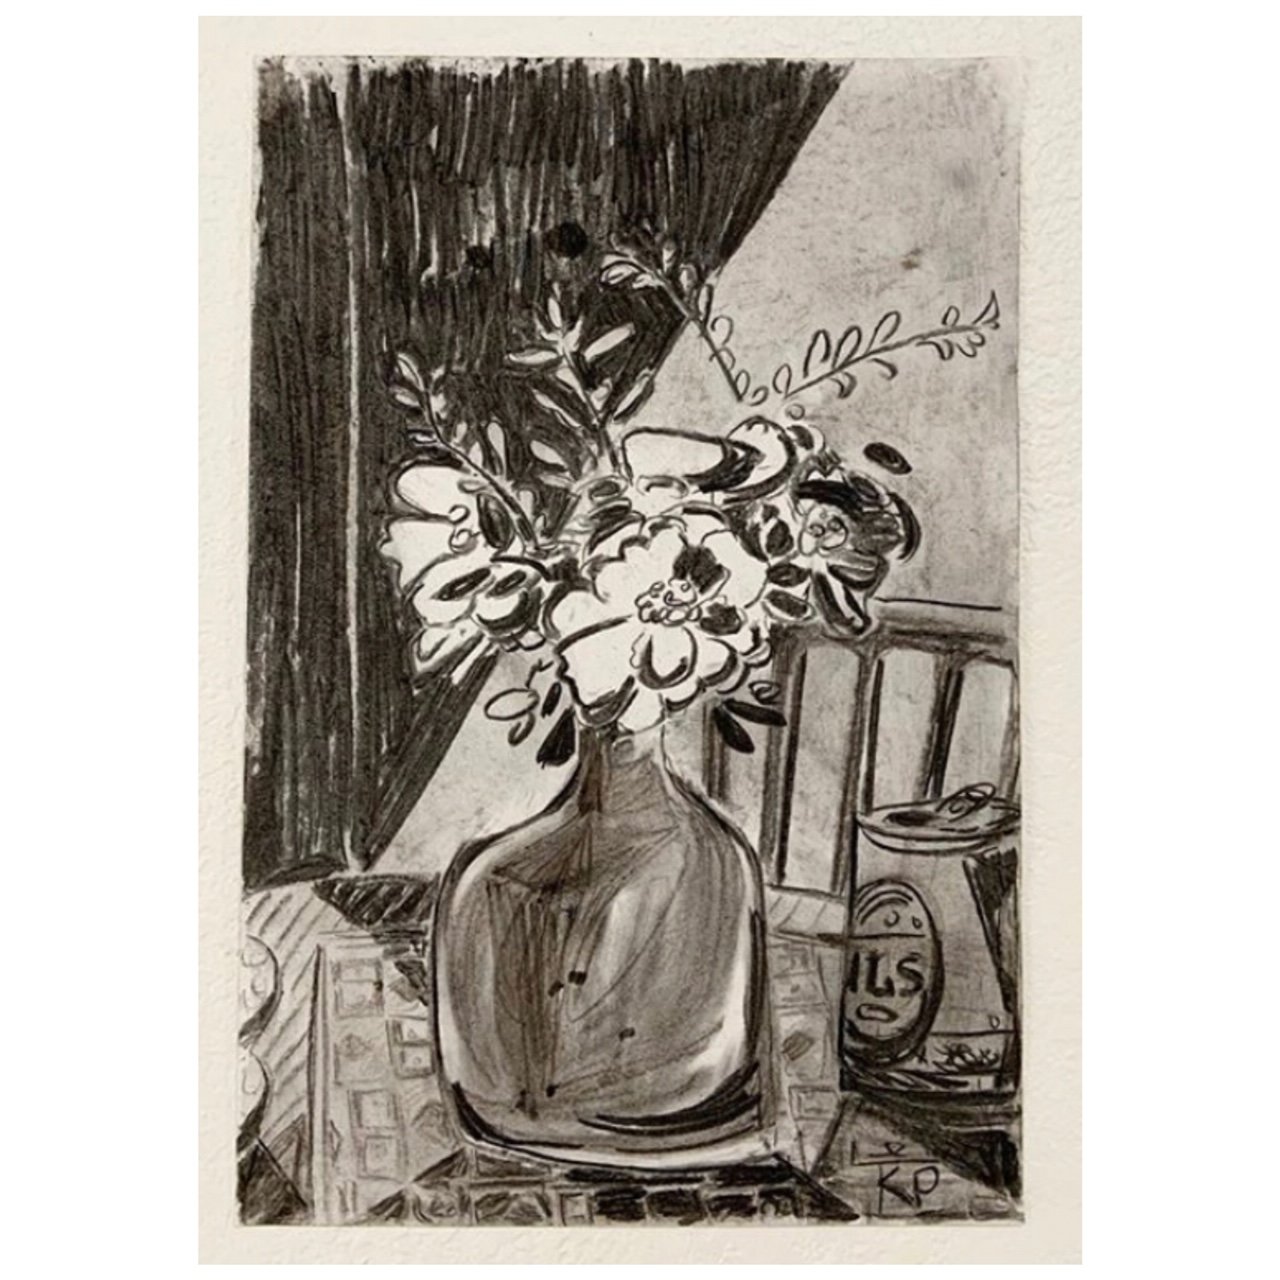 Pilsner and Flowers. Charcoal on paper. 30.4 x 45.7cm. 2020. 850€